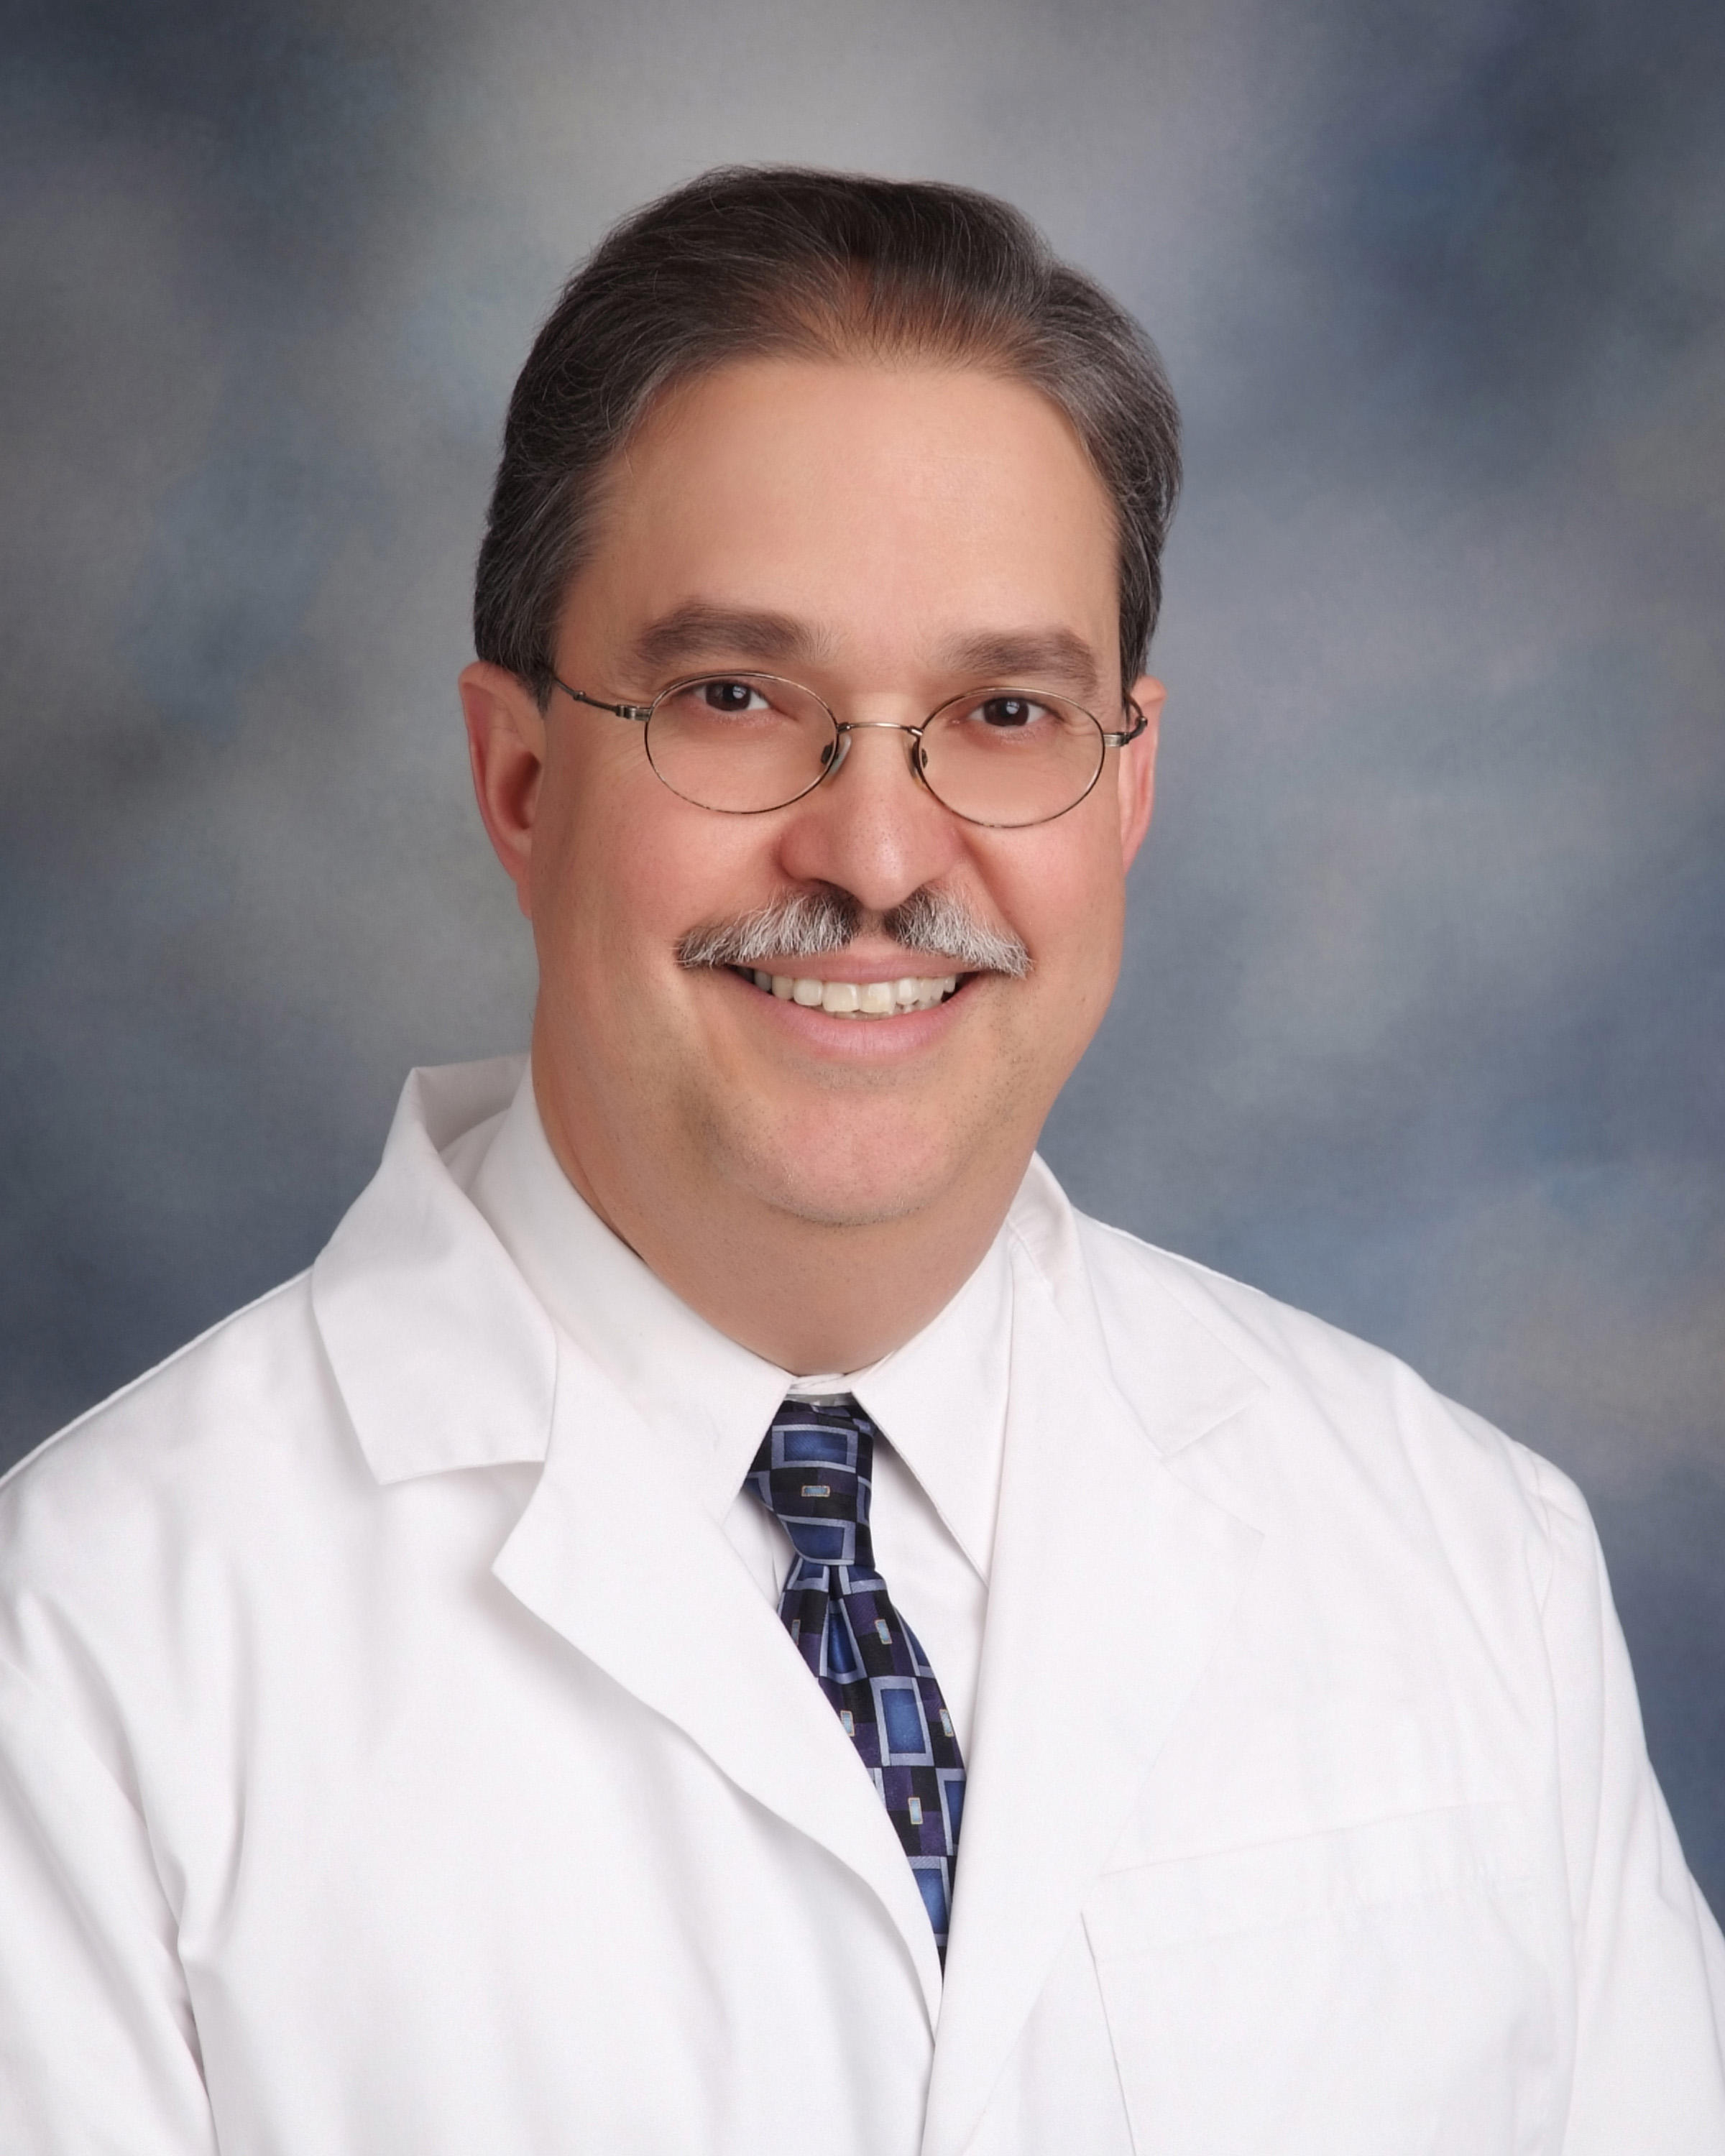 Dr. Jose Valle, MD